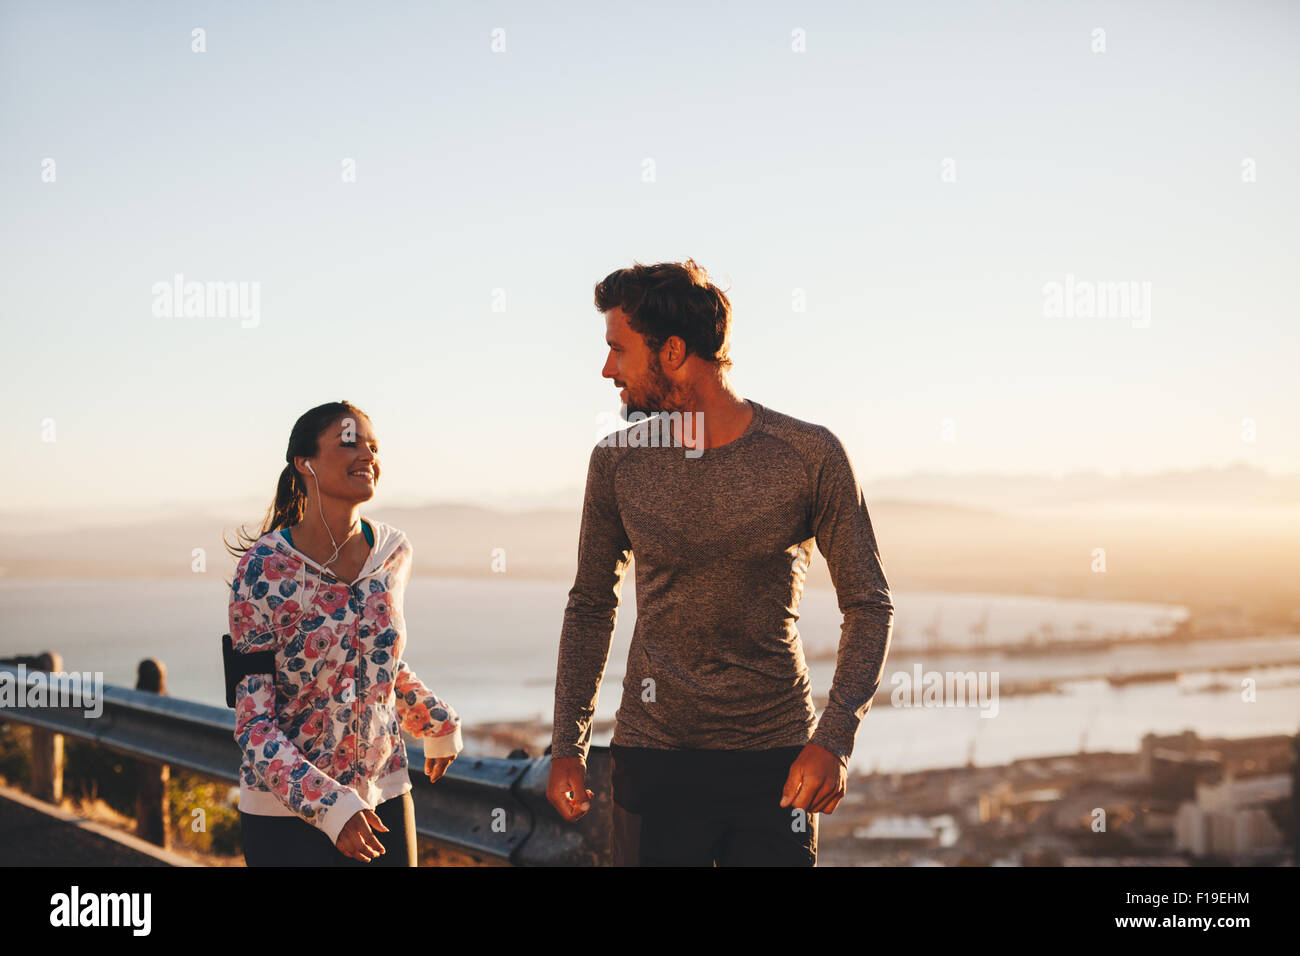 Image of fit young man and woman jogging on country road, looking at each other. Runners enjoying morning run. Stock Photo